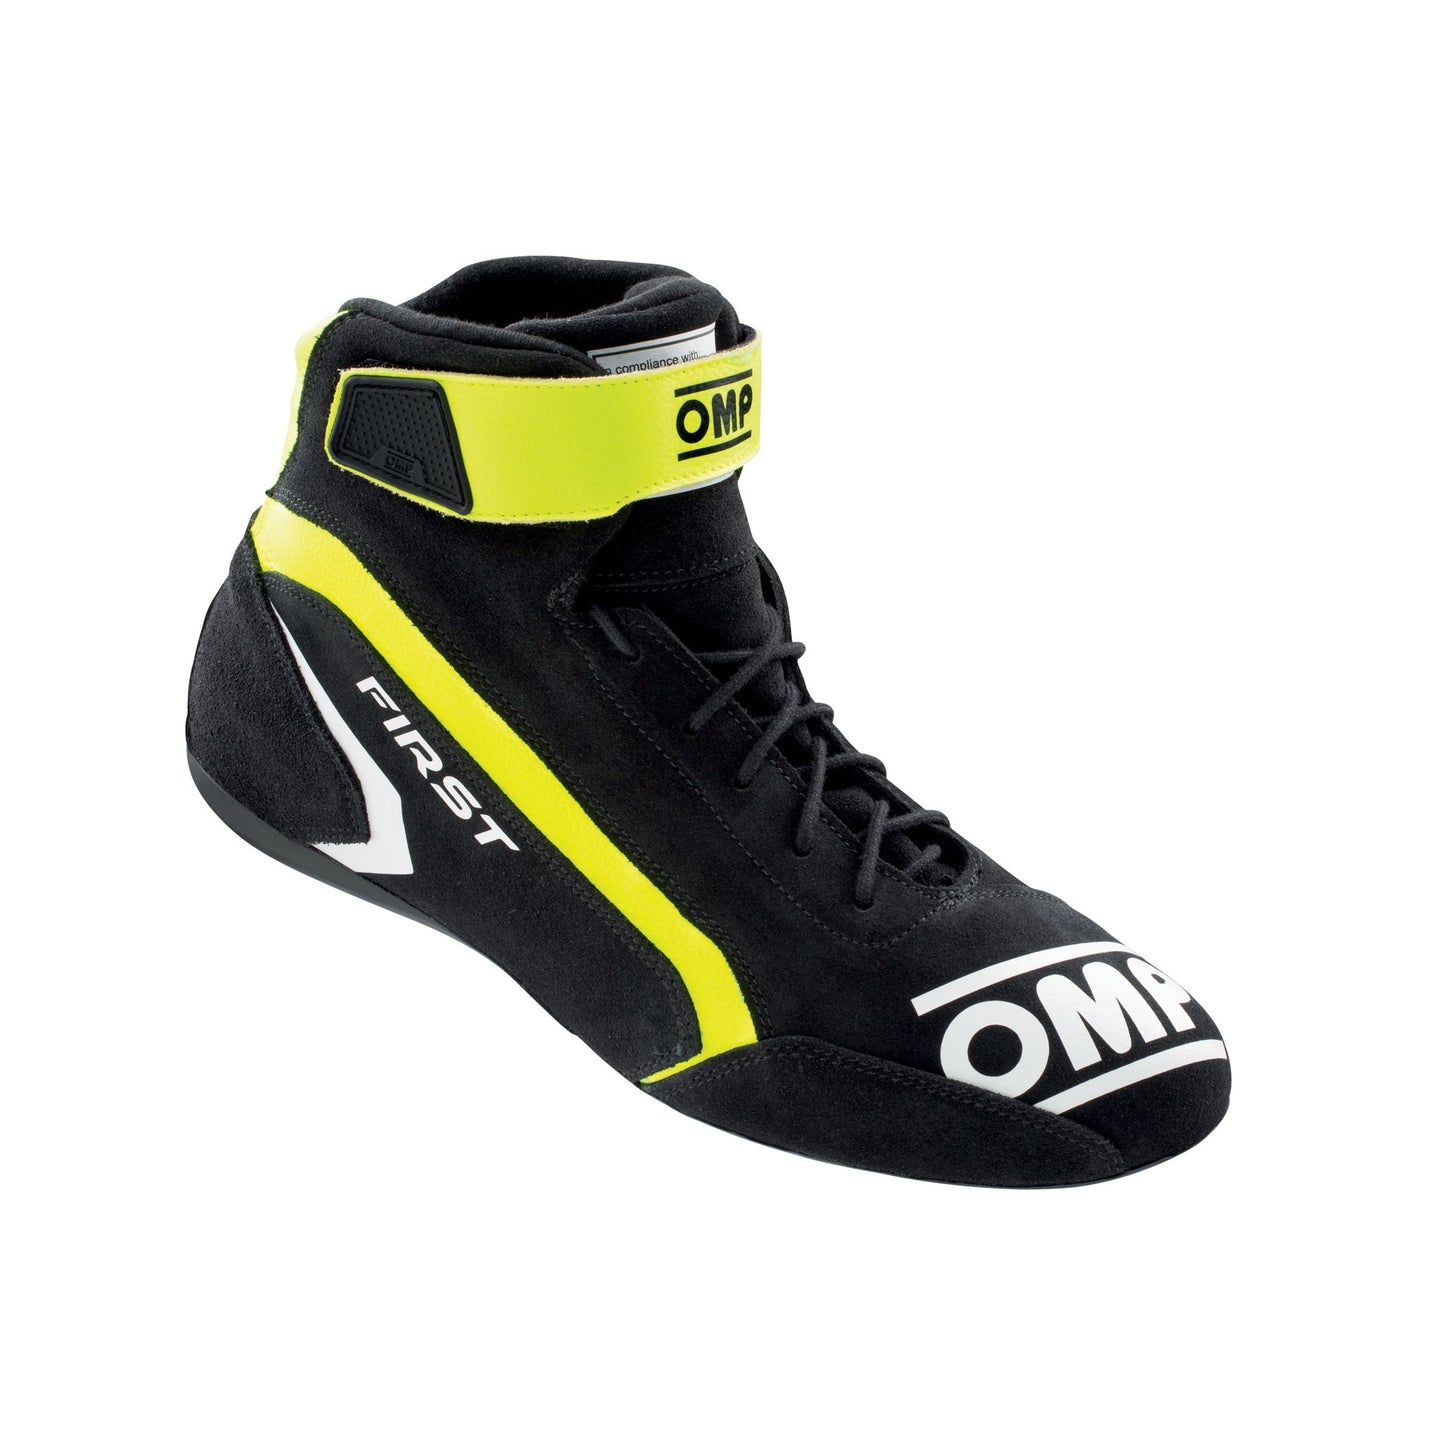 OMP FIRST RACE SHOES